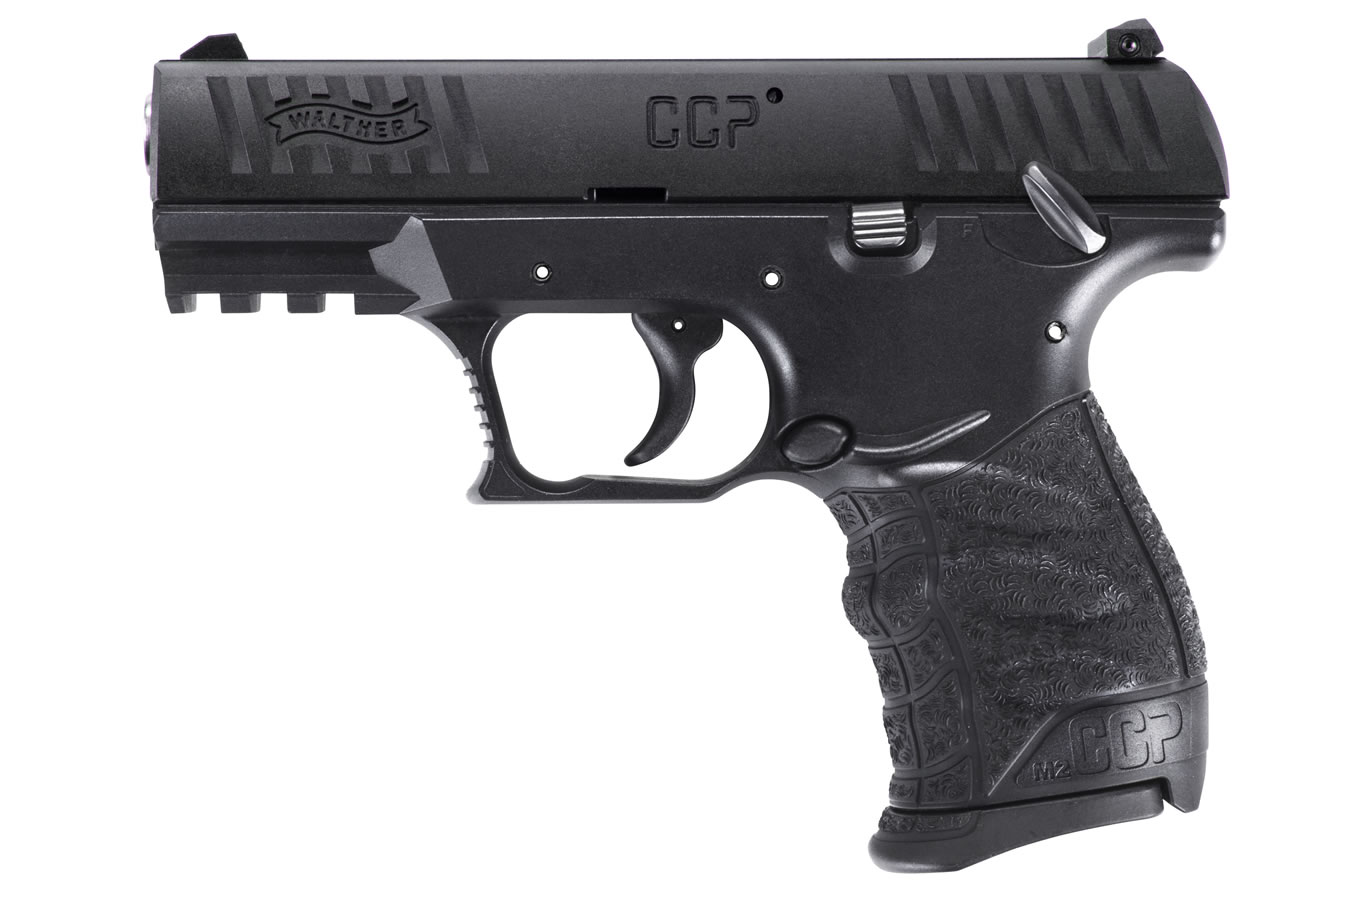 WALTHER CCP M2 380 ACP CARRY CONCEAL PISTOL